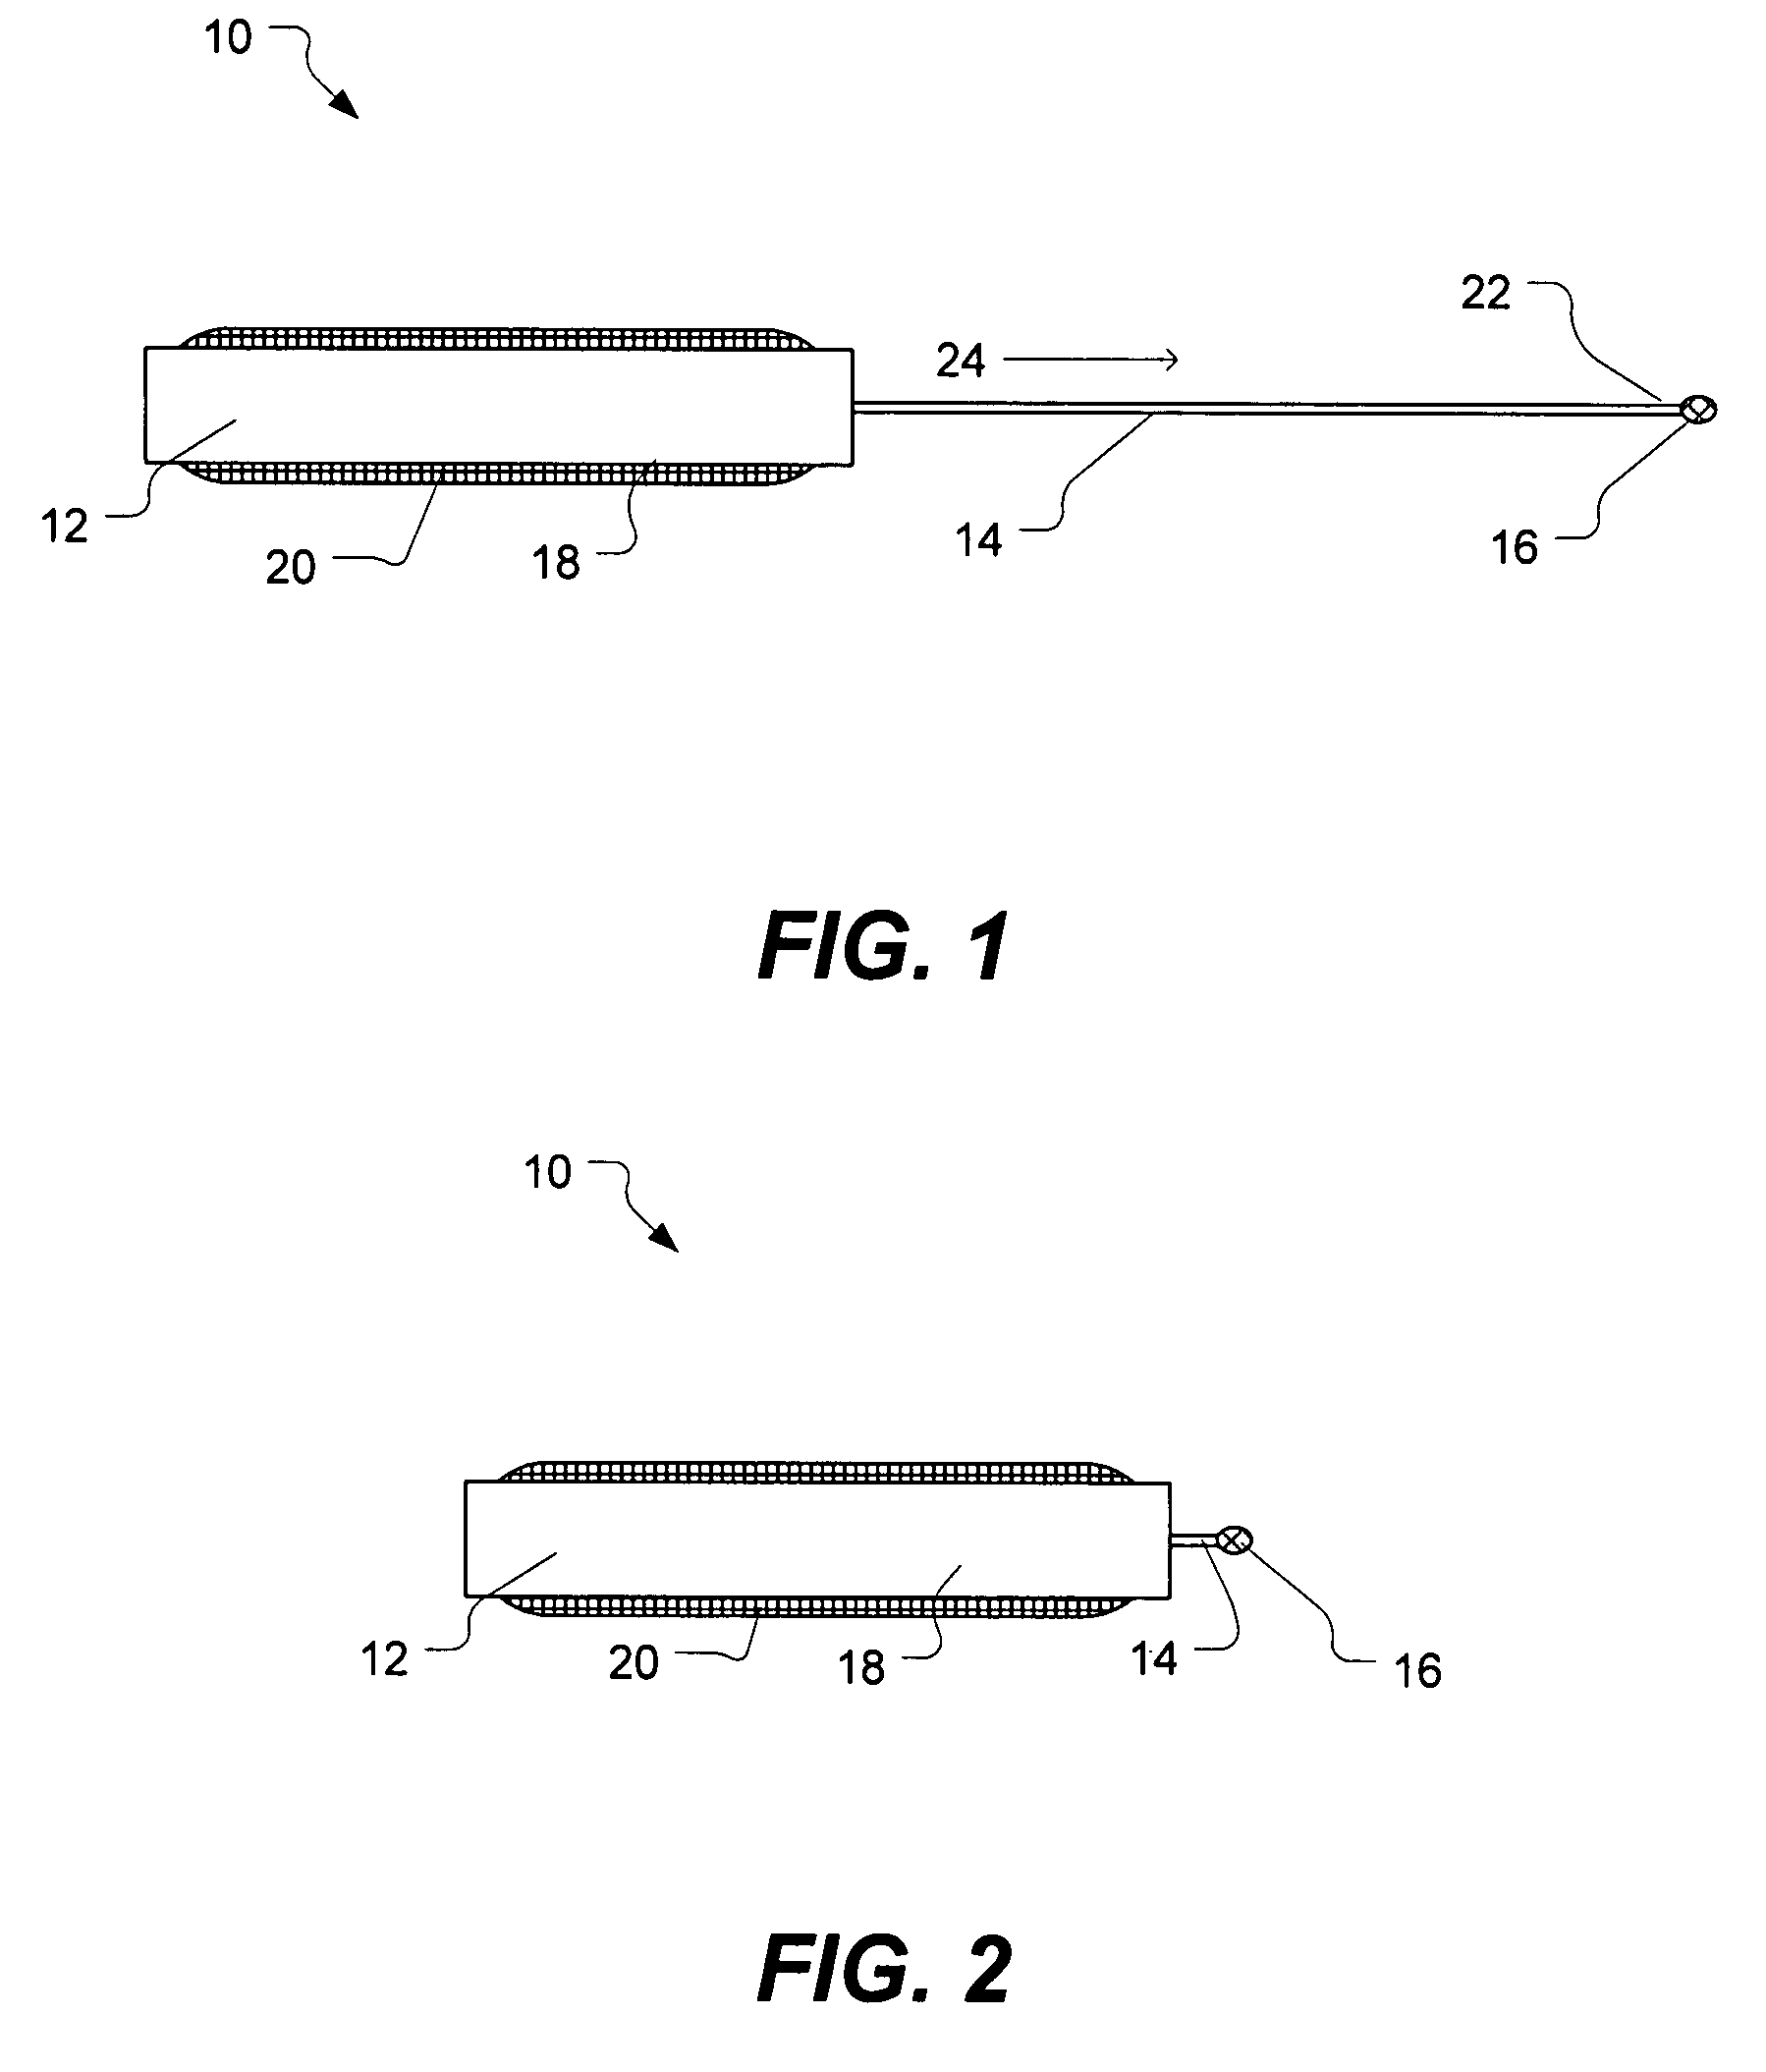 Unmanned ground robotic vehicle having an alternatively extendible and retractable sensing appendage